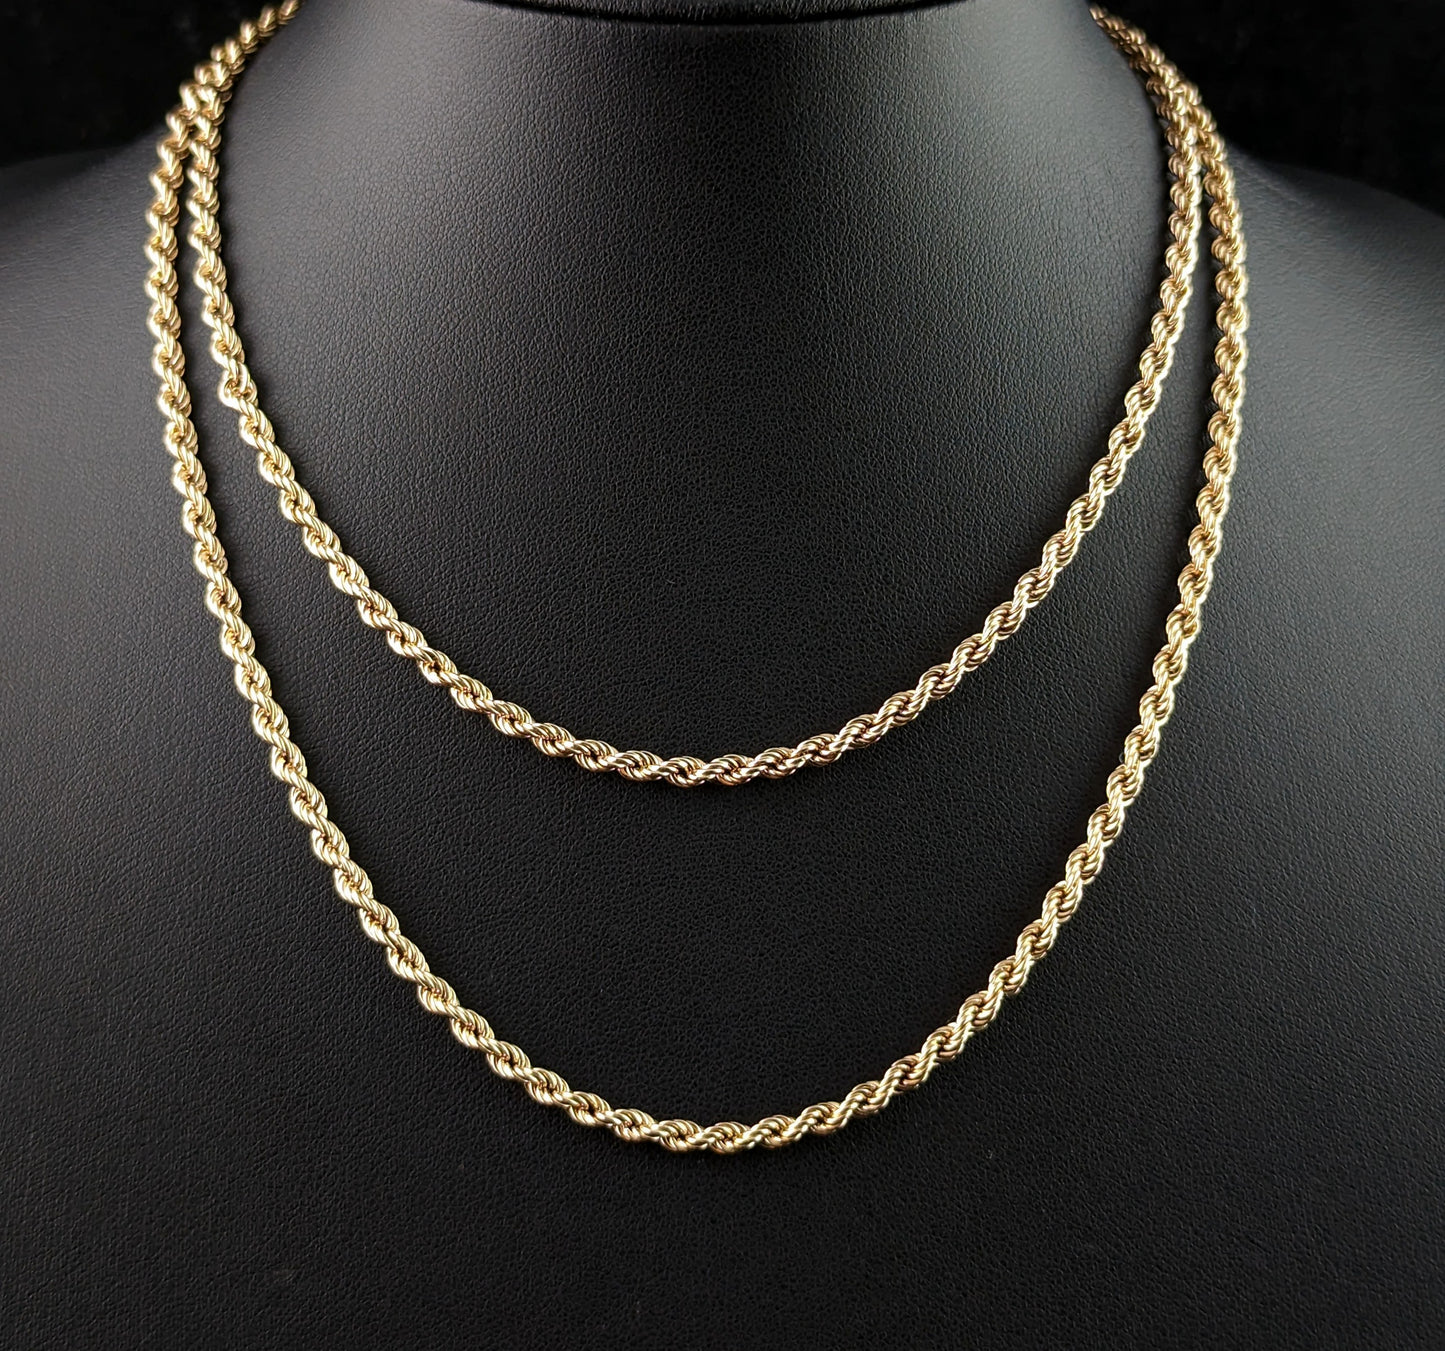 Vintage 9ct yellow gold rope twist chain necklace, long